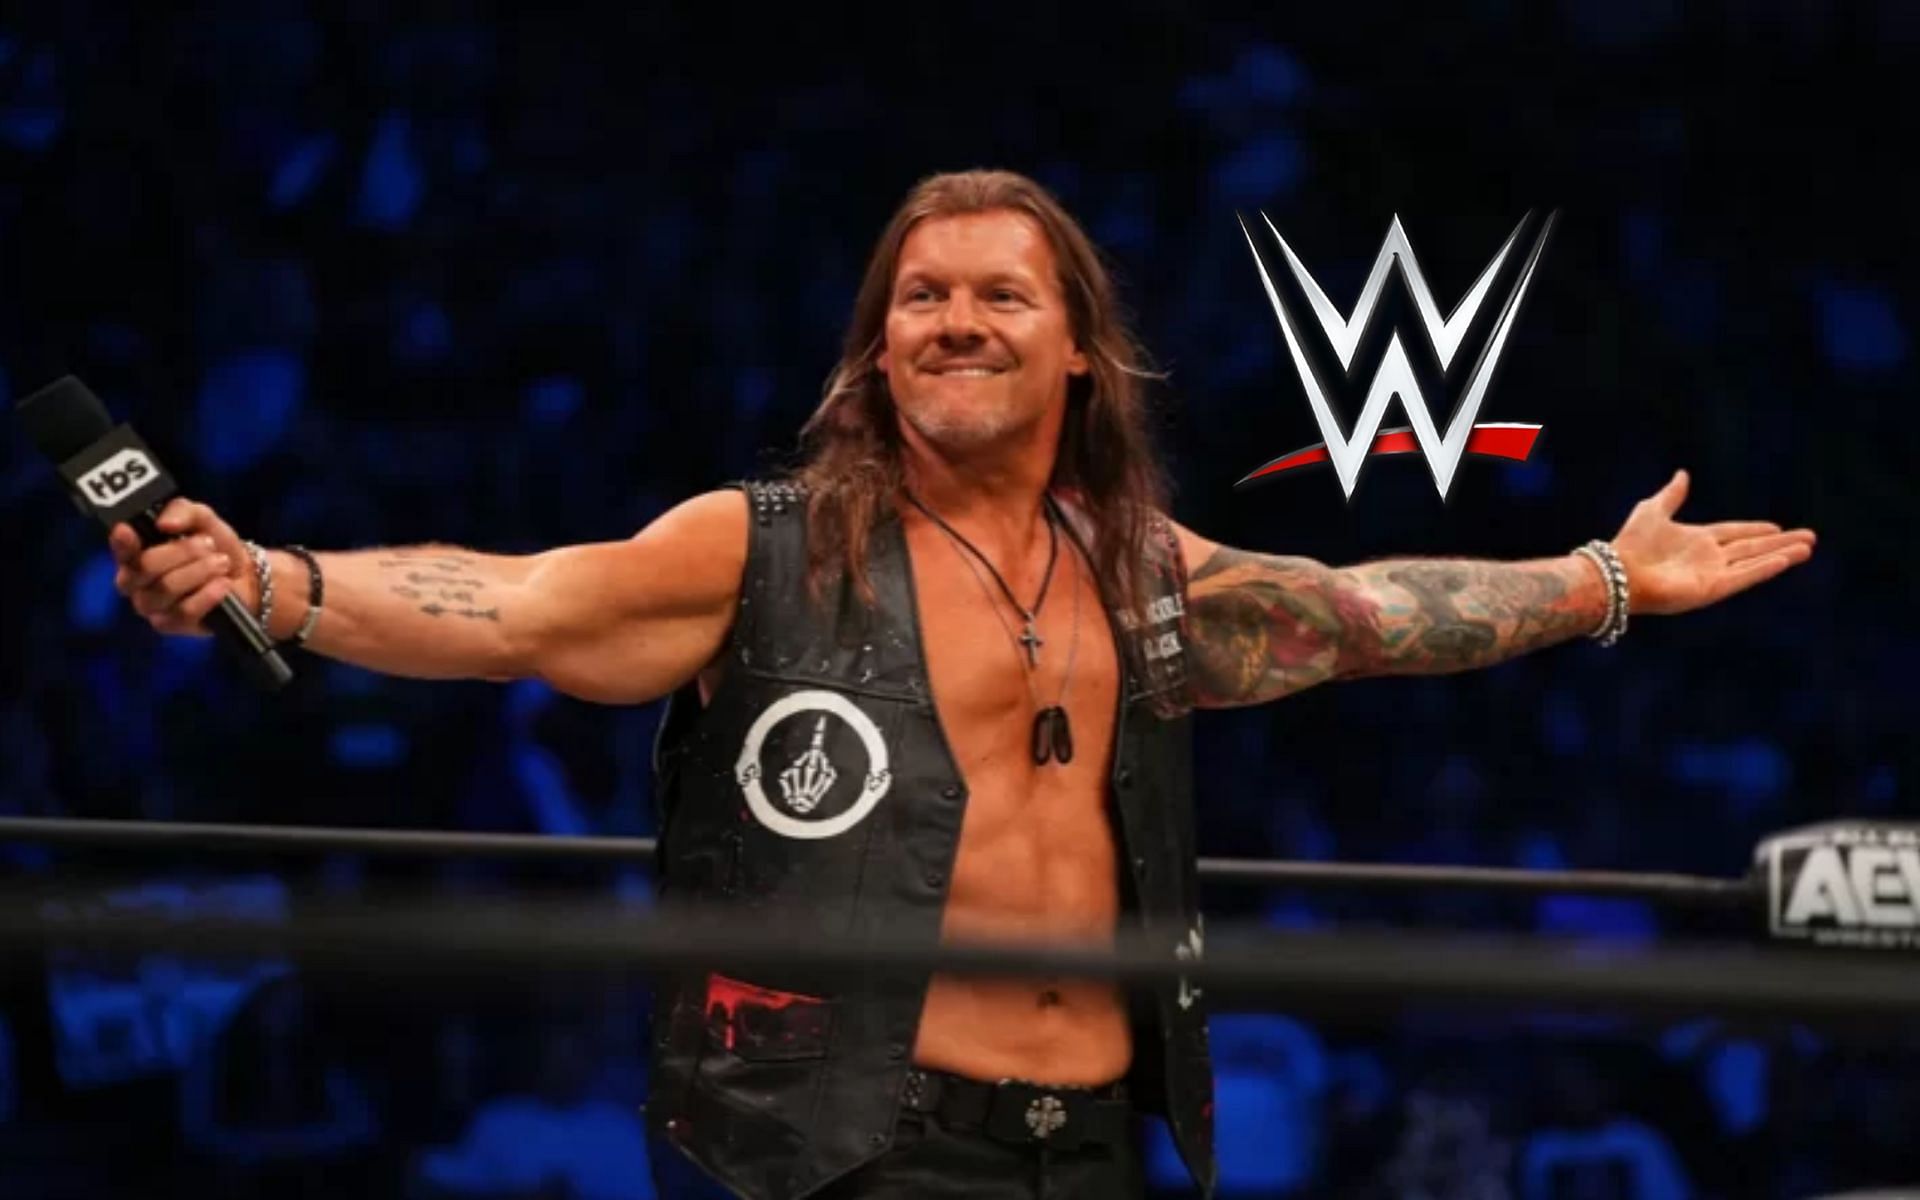 A WWE legend says Chris Jericho would be on his team in terms of enhancing the AEW product.